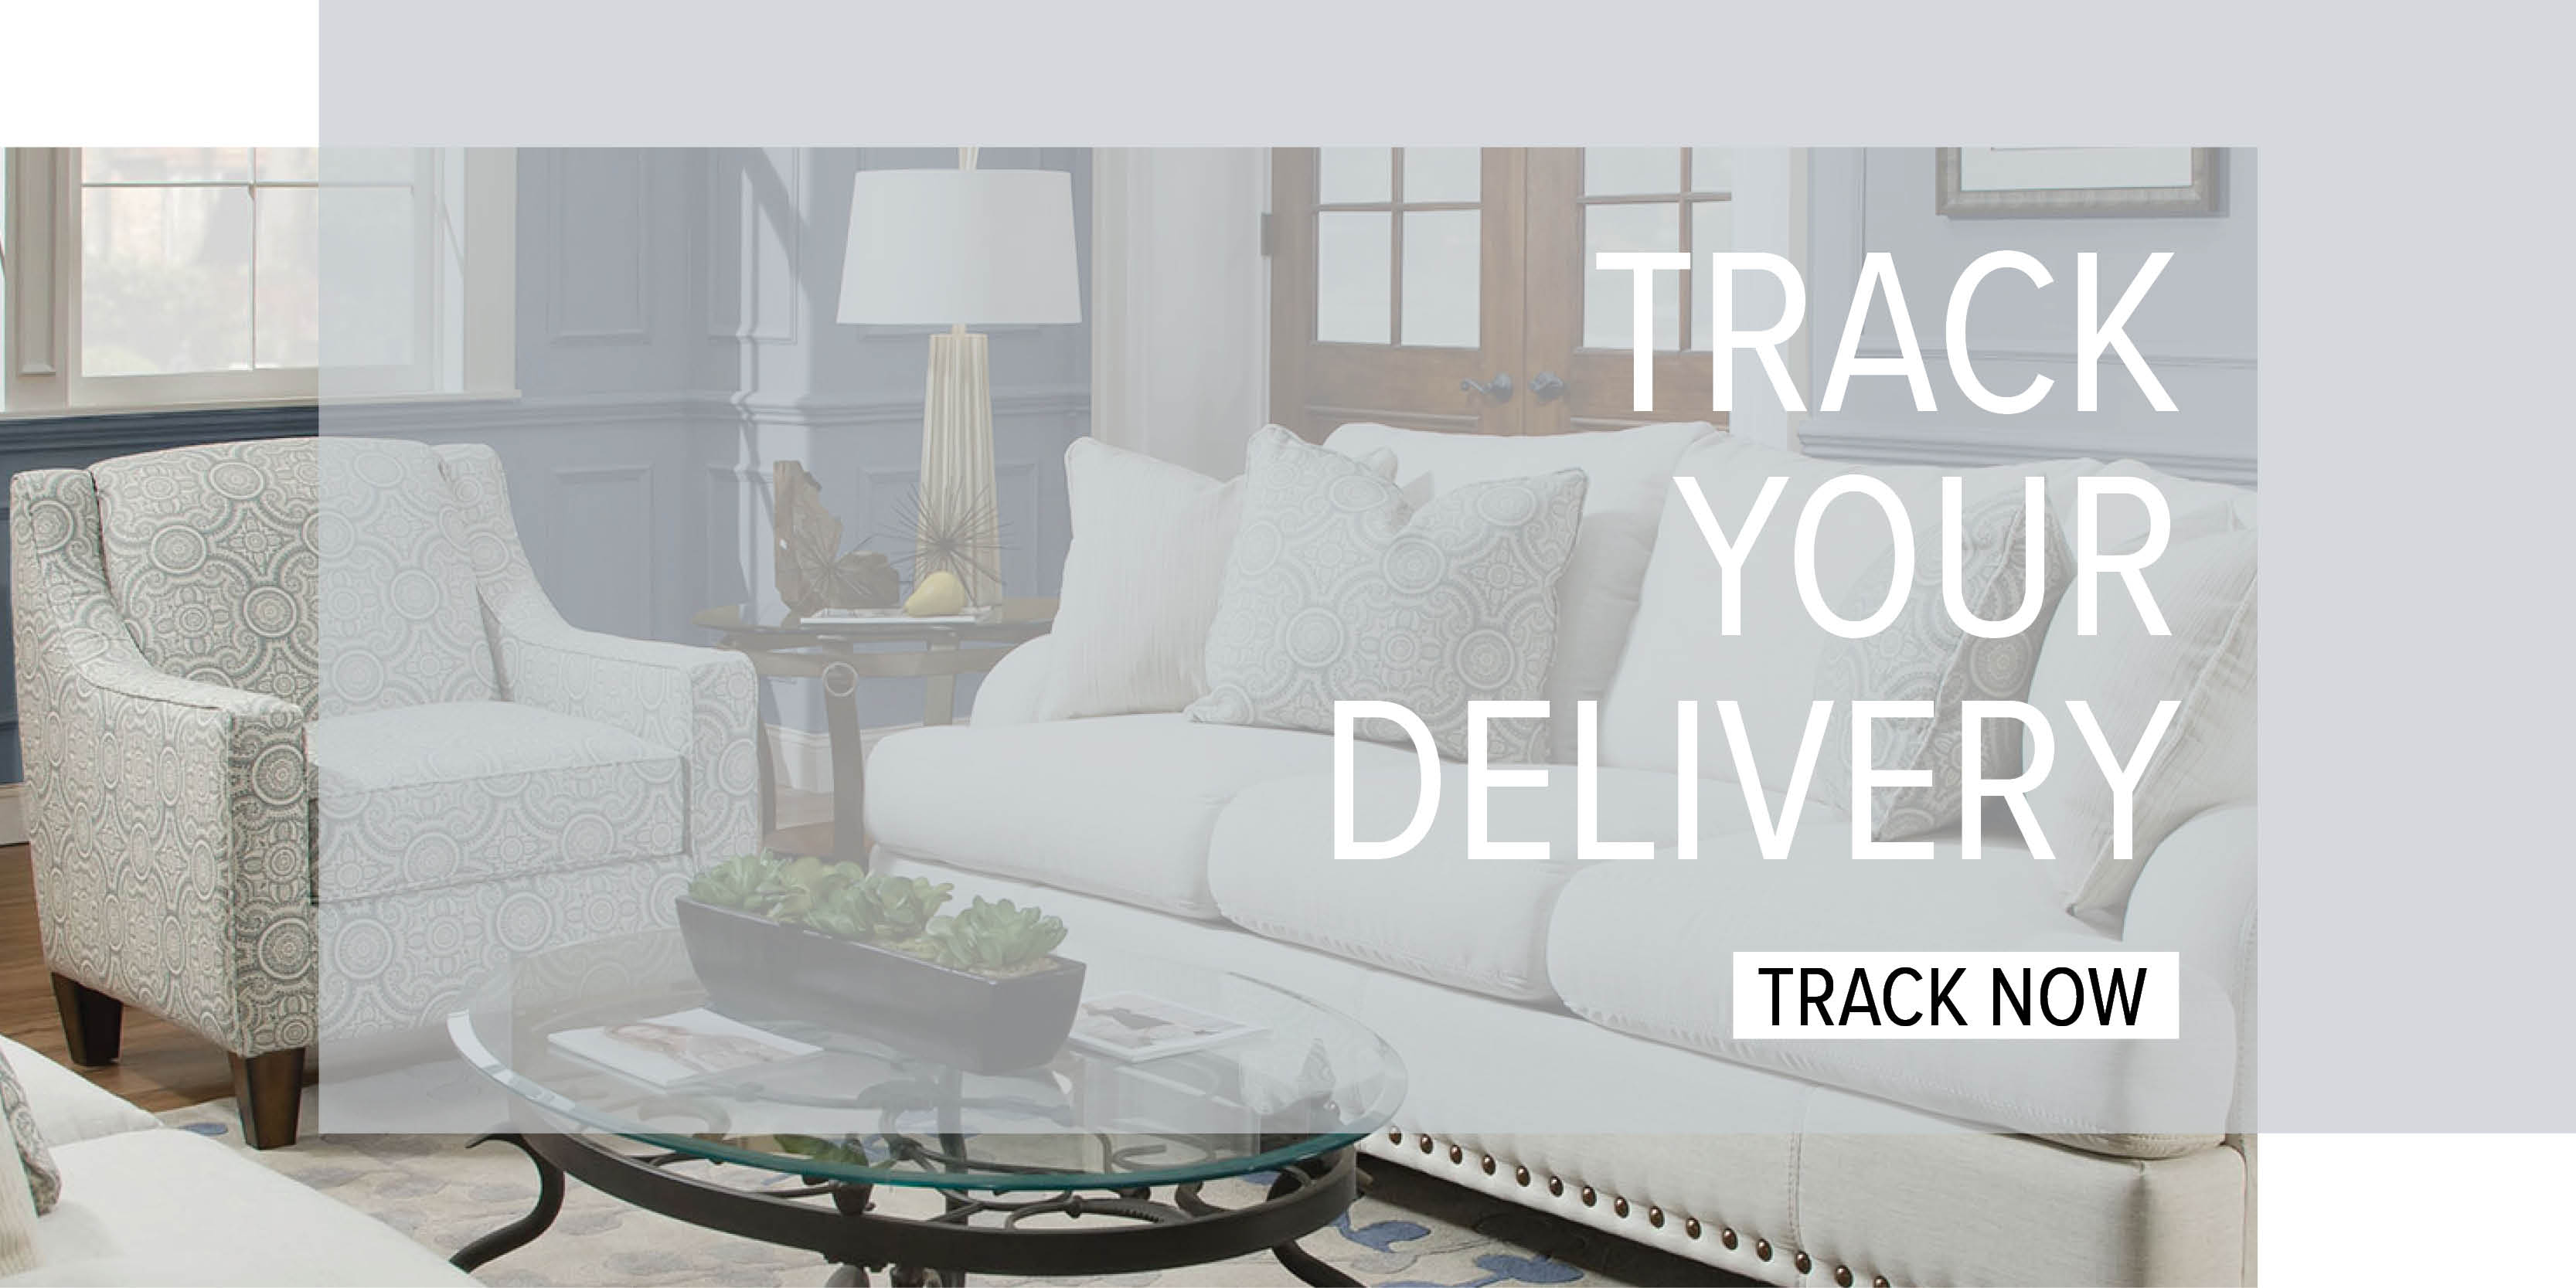 Track Your Delivery